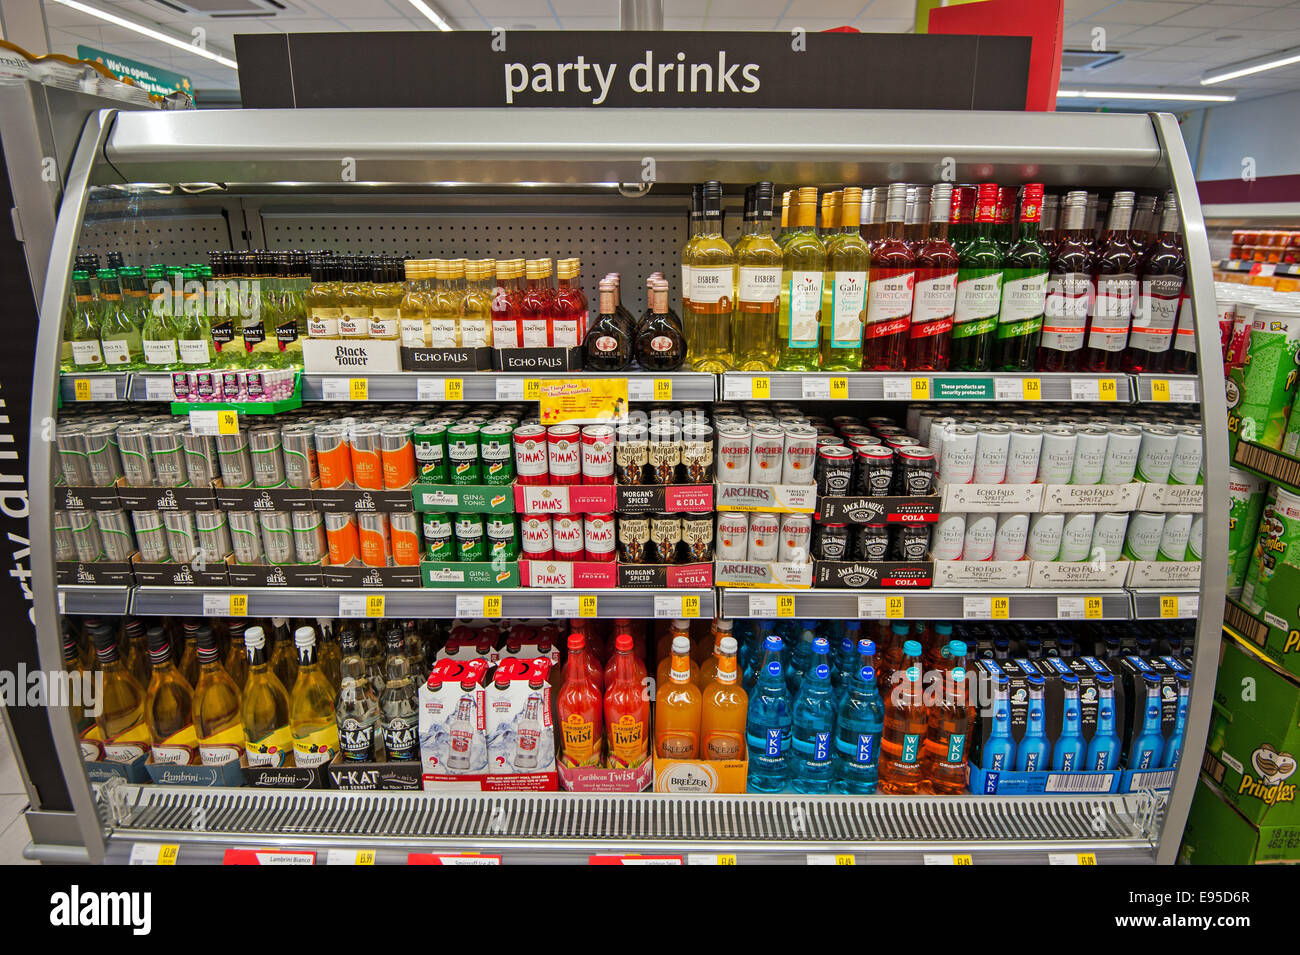 Supermarket party drinks and alcopops Stock Photo